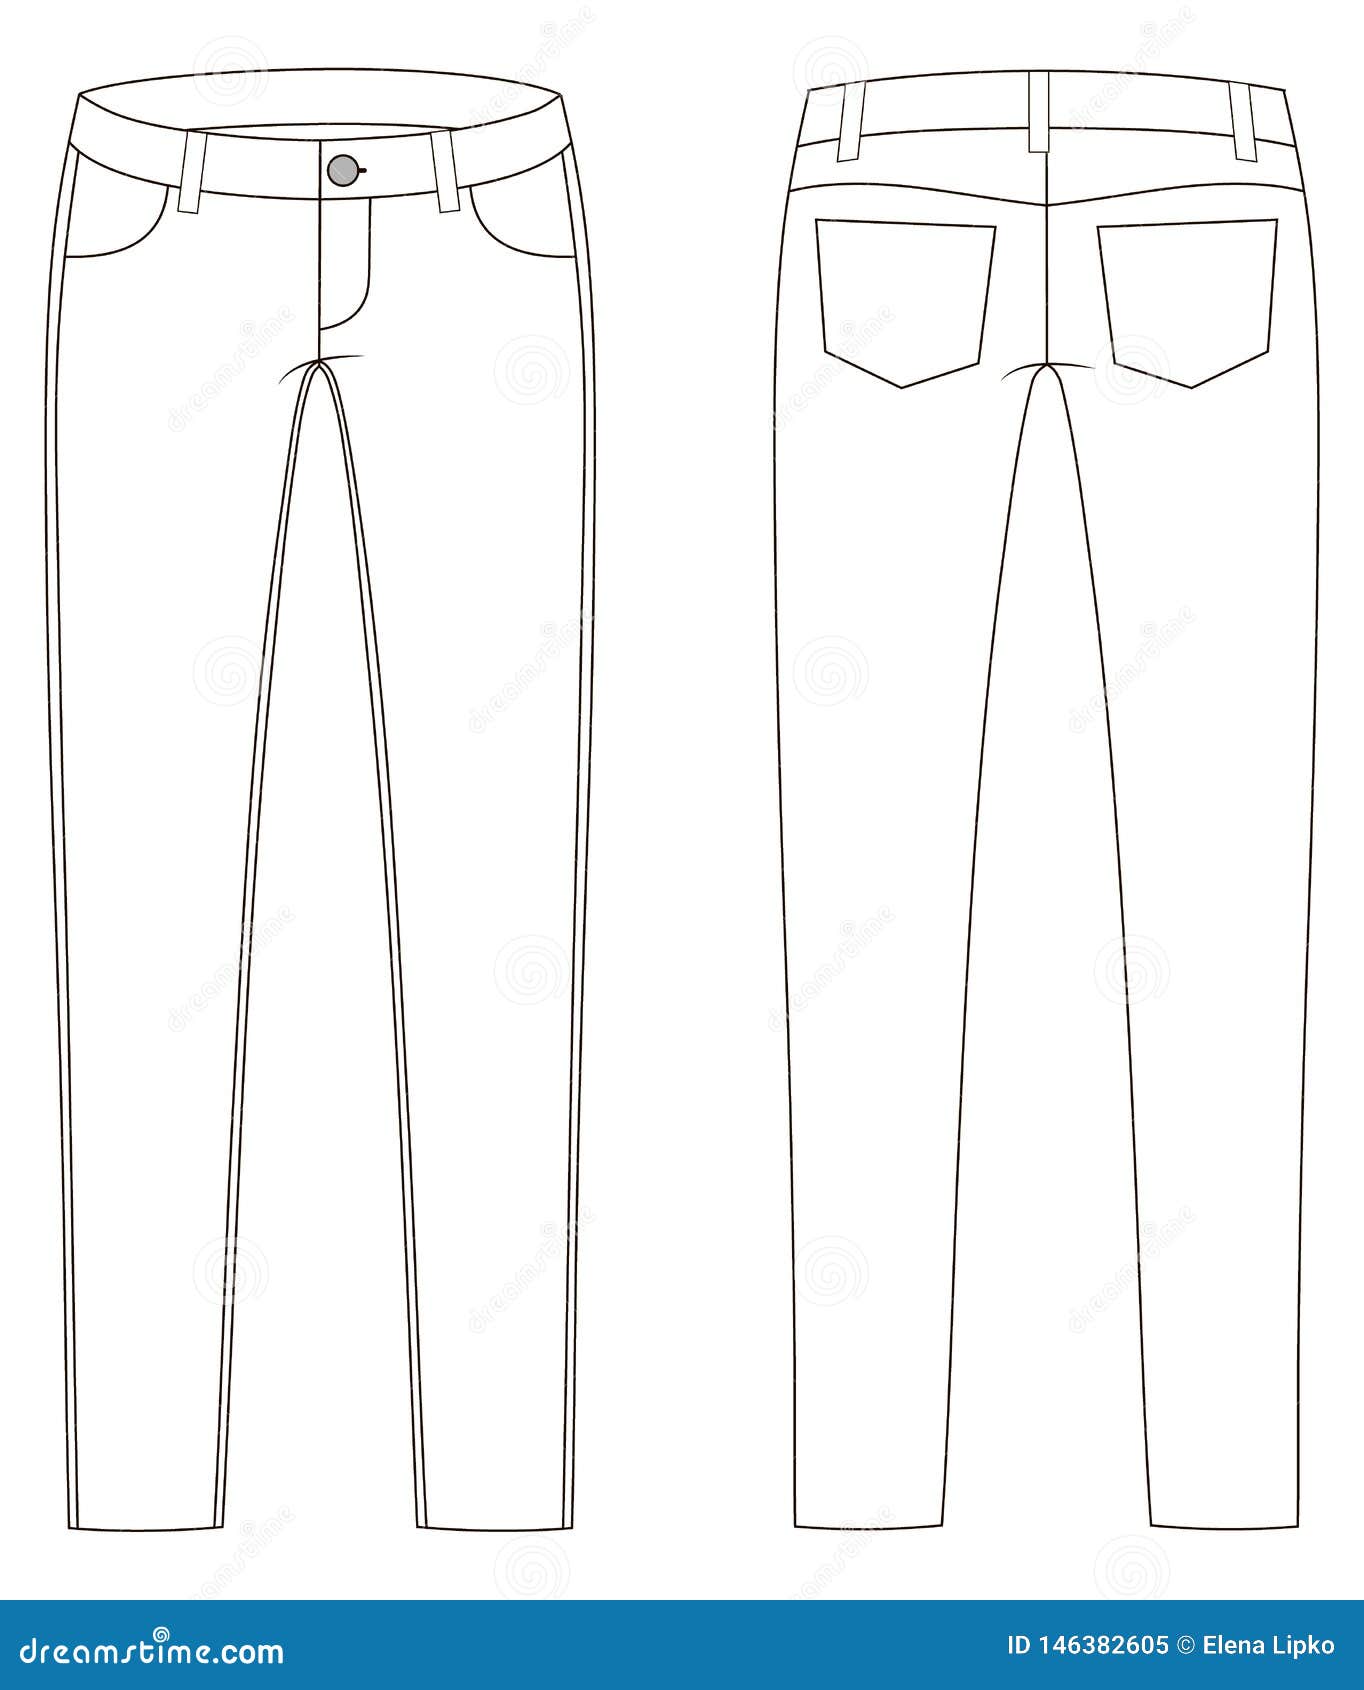 Fashion Technical Sketch of Jeans in Vector Graphic Stock Vector ...